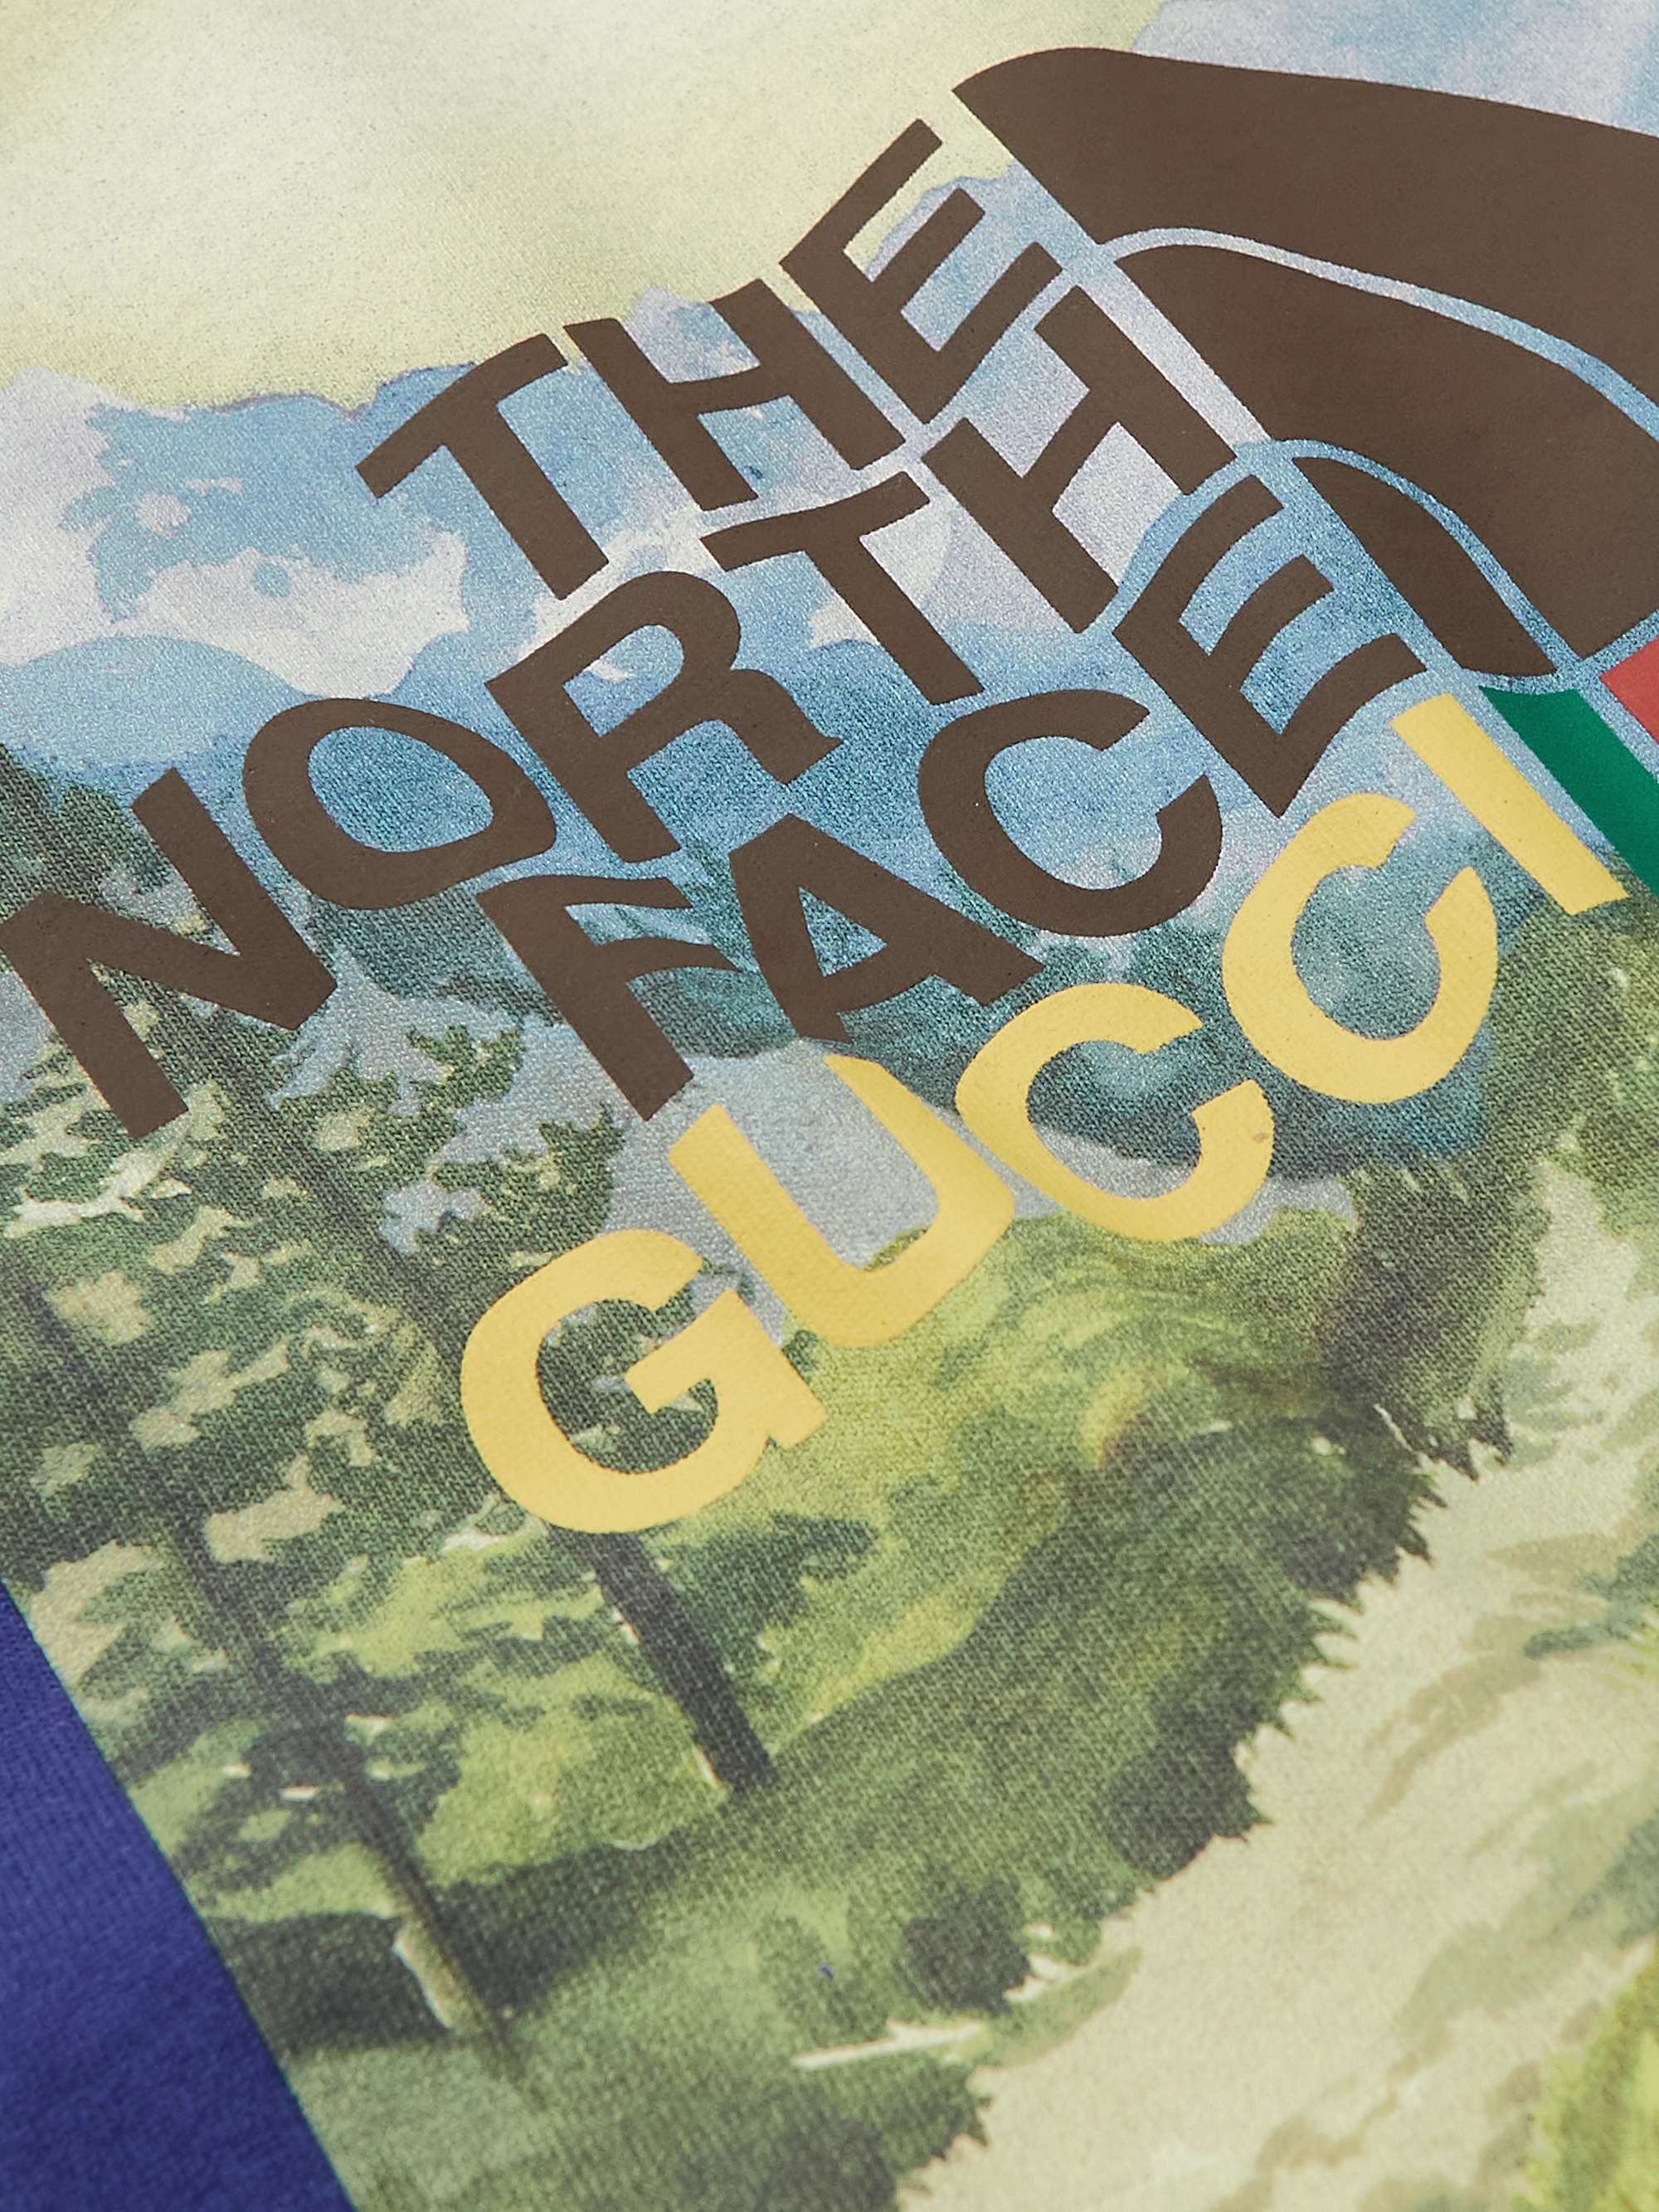 GUCCI + The North Face Logo-Print Cotton-Jersey T-Shirt